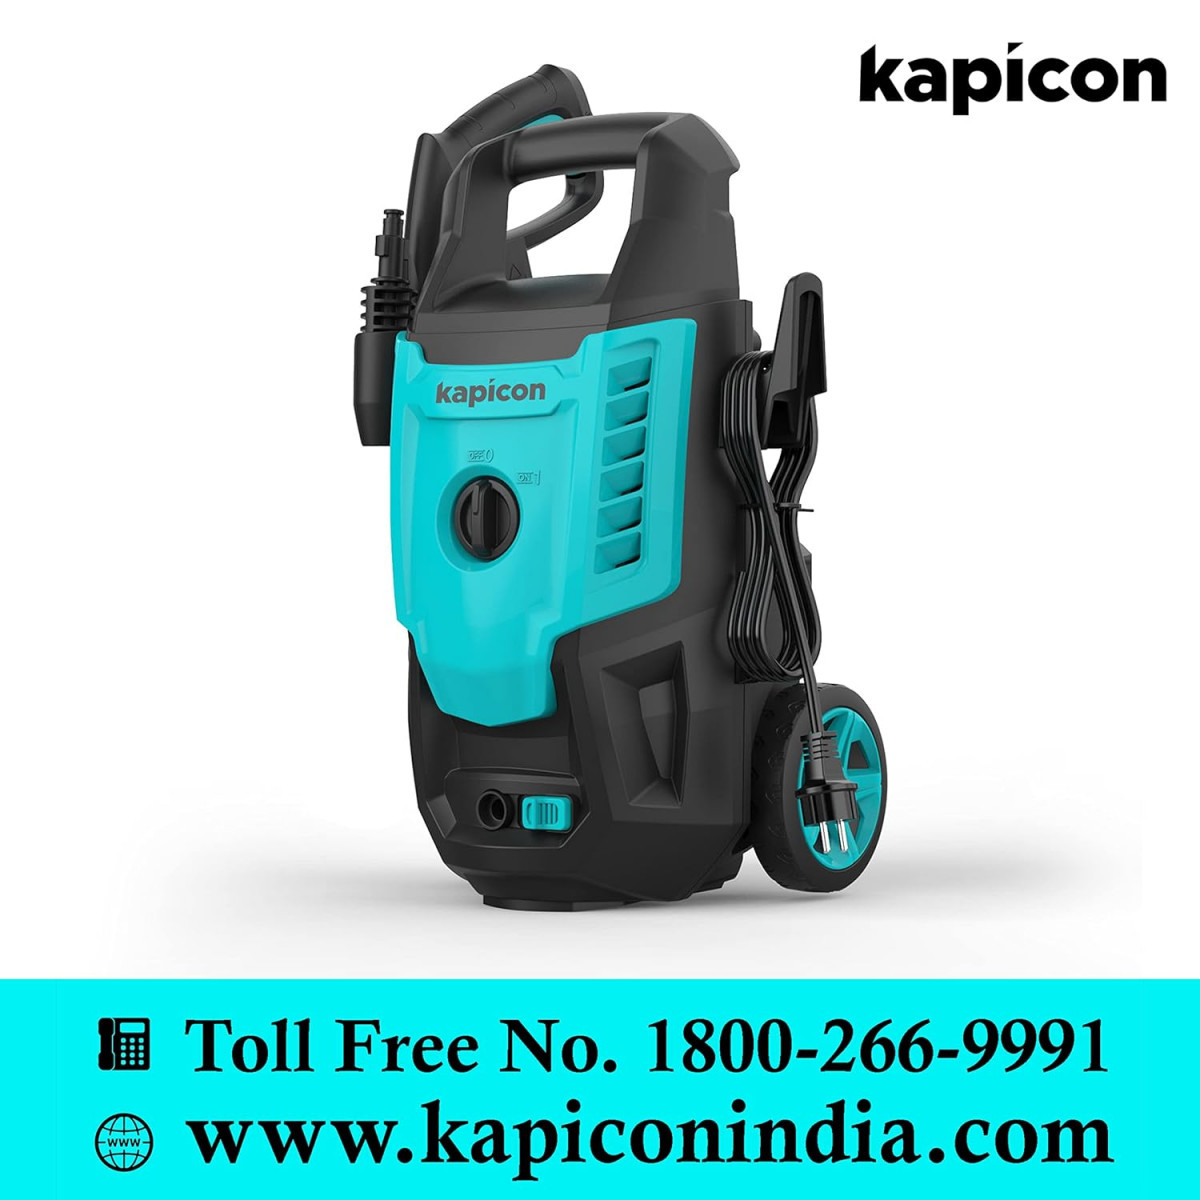 Kapicon KP-30 Portable High Pressure Car Washer Machine Motive Power 1800 Watts with max Pressure 135-160 Bars 55 LMin Flow Rate Portable for Car Bike and Home Cleaning Purpose Updated Model